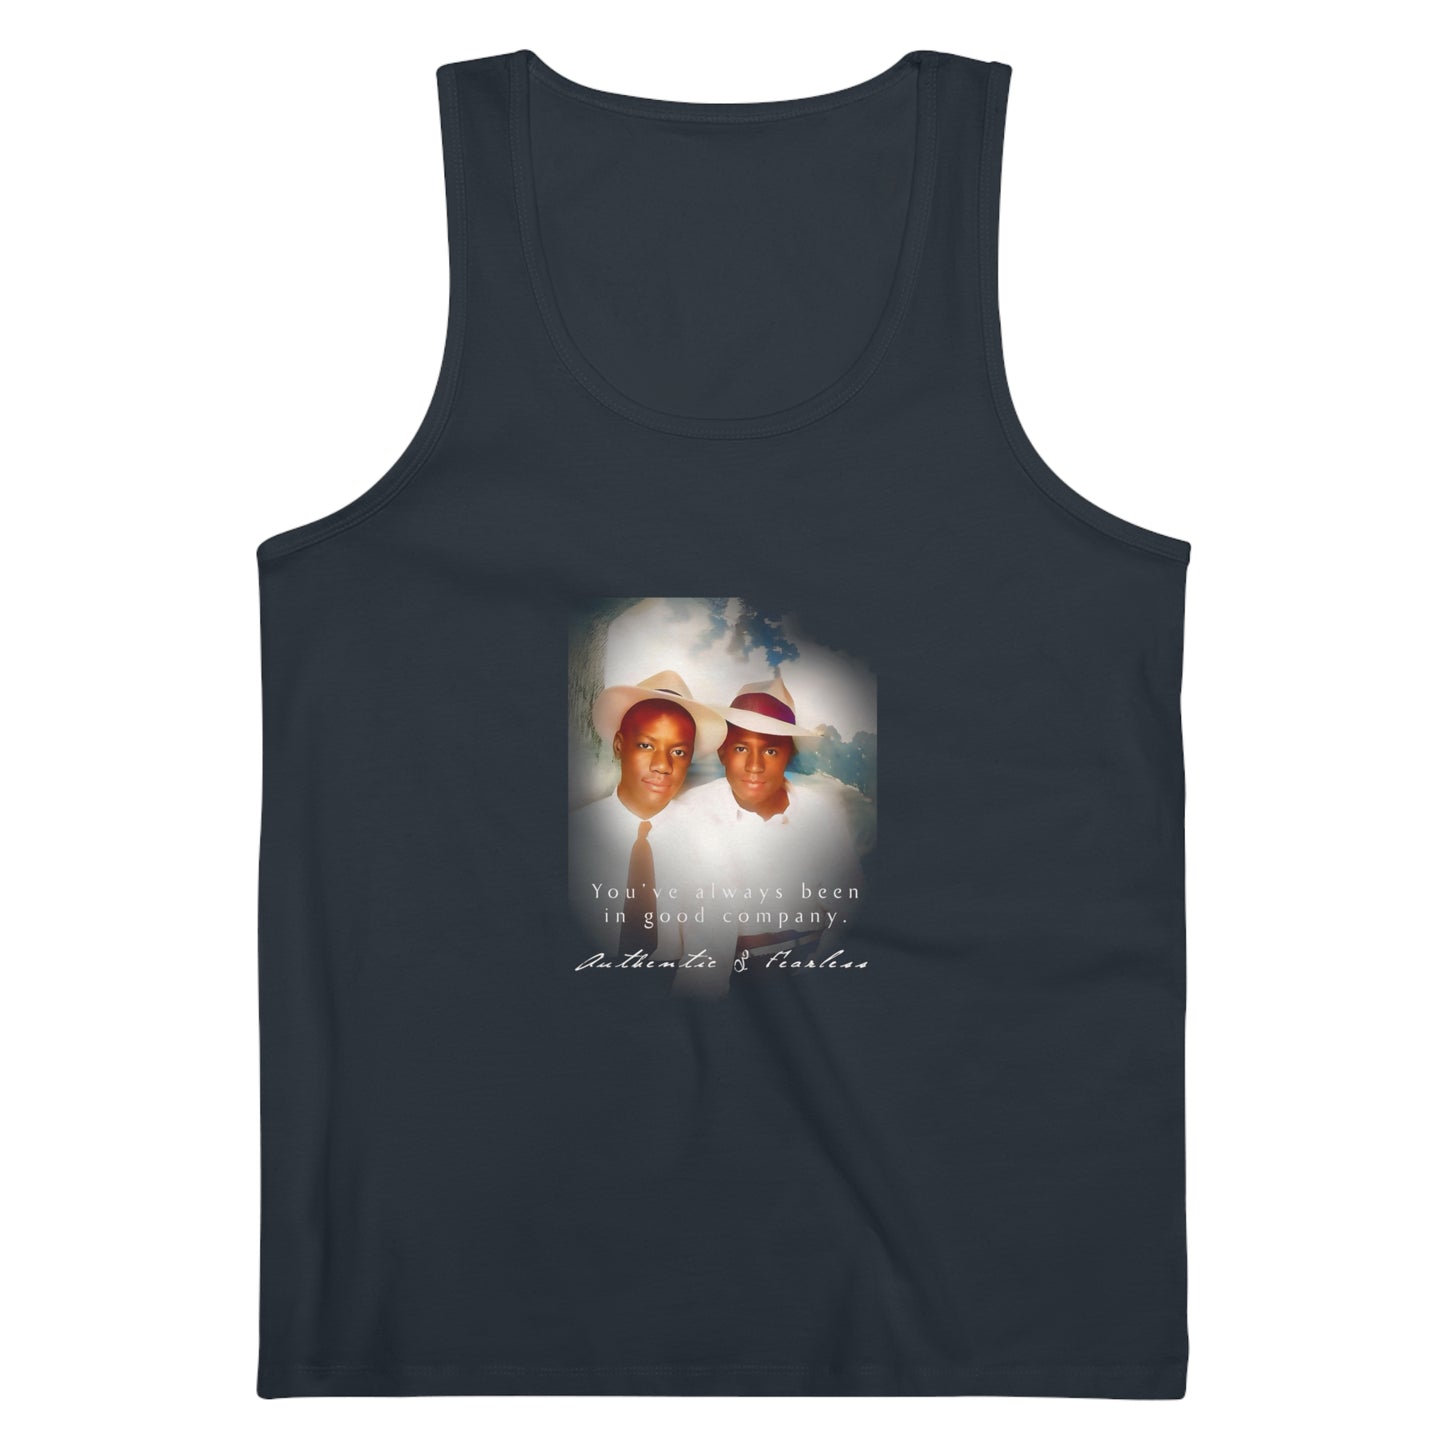 paire 019 | Vintage Jersey Tank Black Male Gay Couple Husbands Gift Present LGBTQ Queer Dad